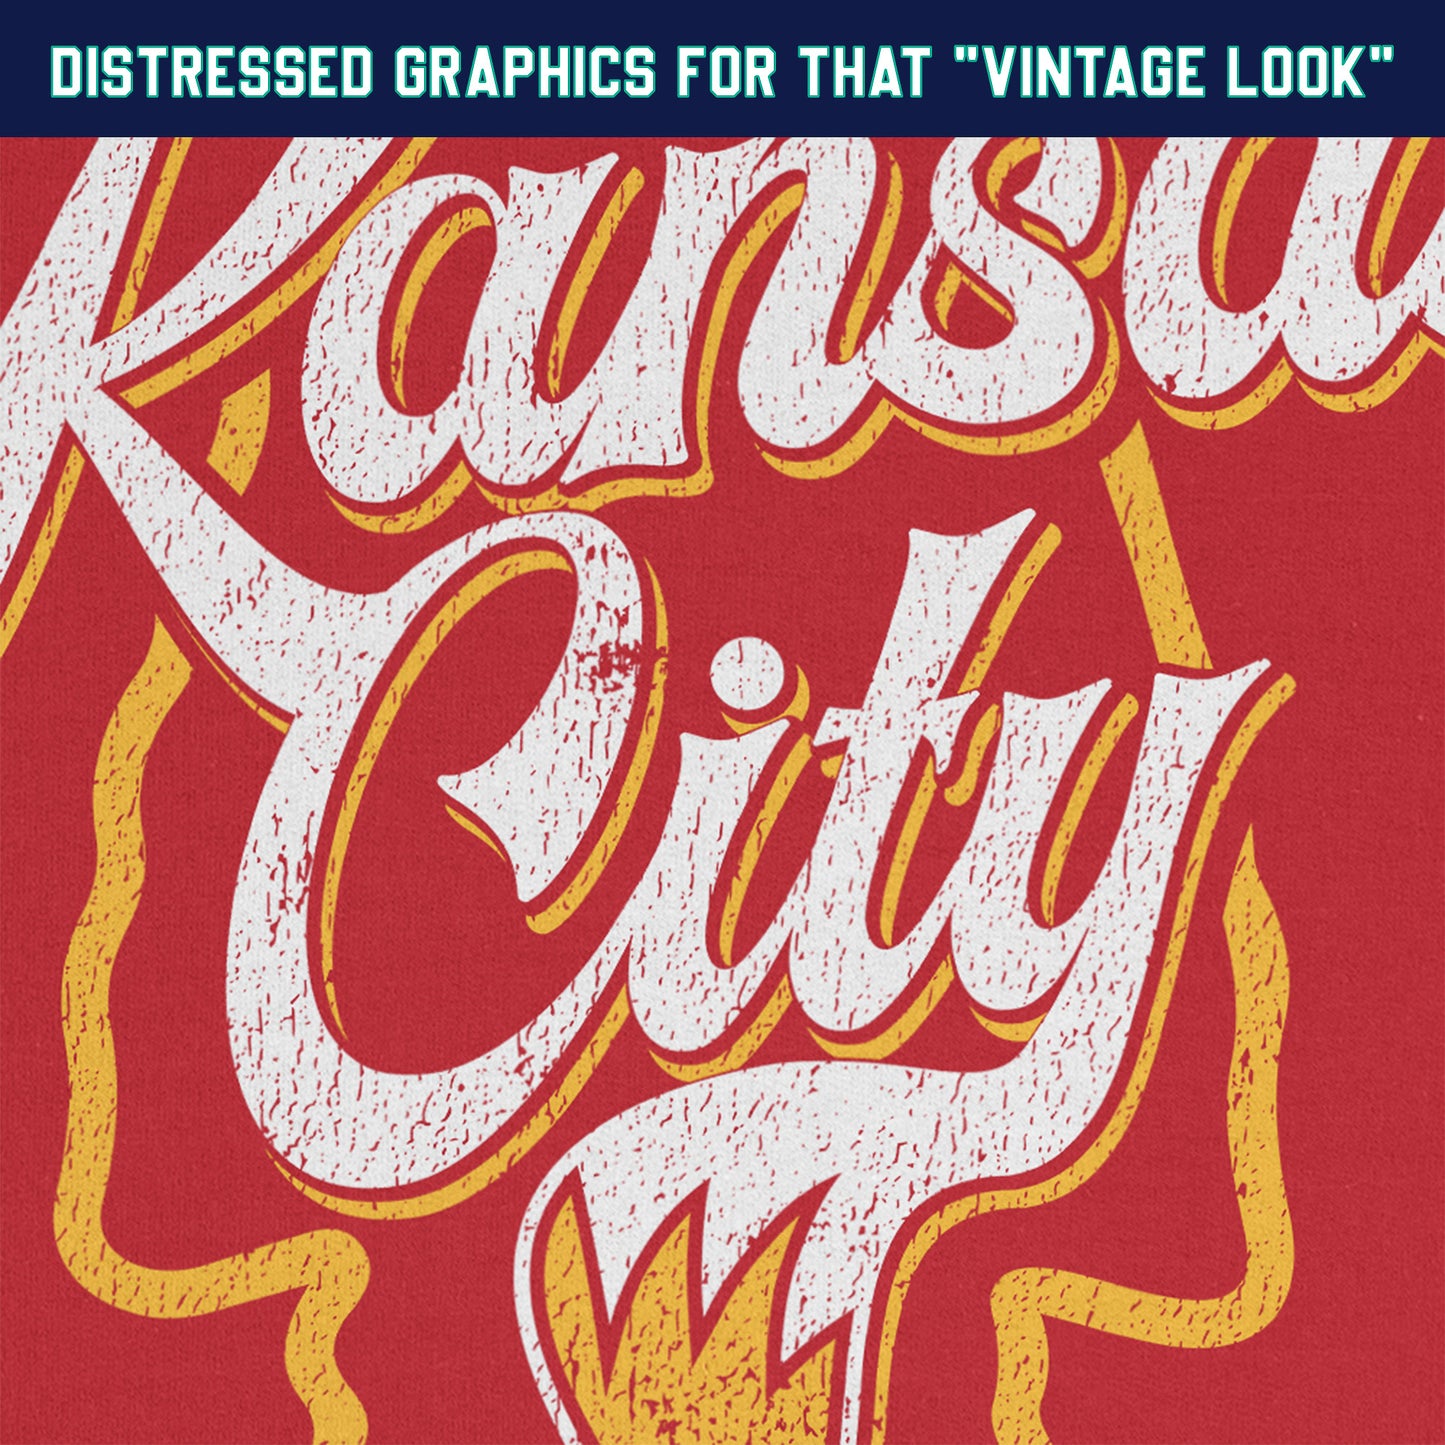 KC Swag Kansas City Chiefs white/yellow KANSAS CITY (with foxtail) with arrowhead graphic on heather red t-shirt closeup details of distressed graphics